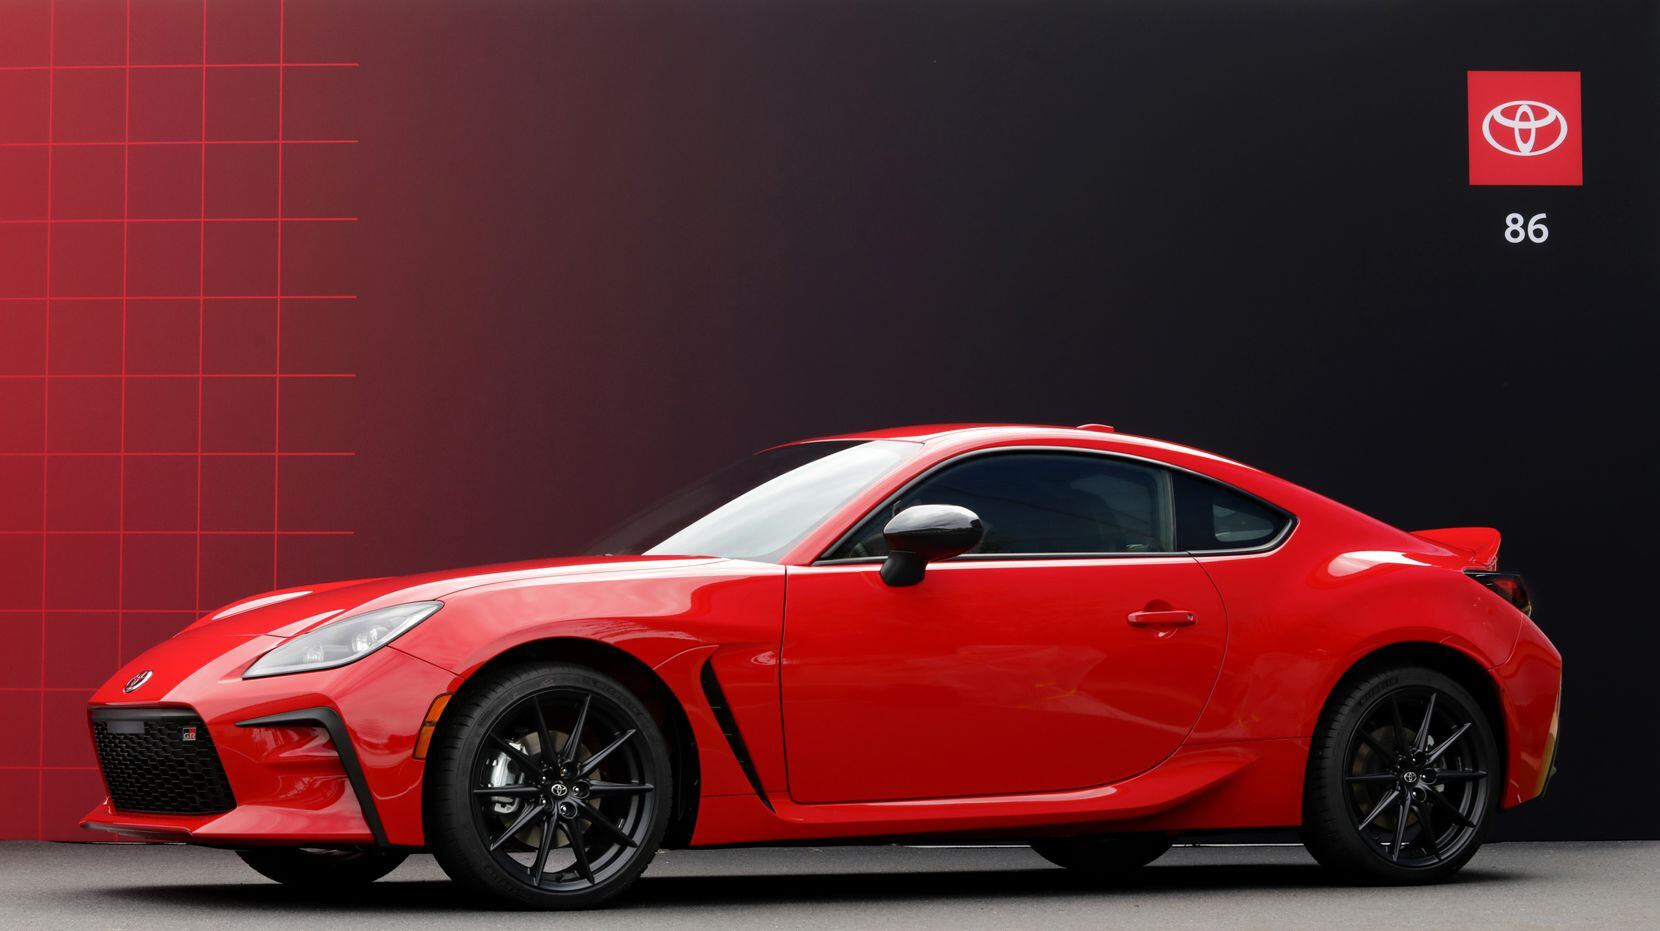 For sports car enthusiasts, Toyota has a limited-edition GR Supra A91-CF with carbon fiber...